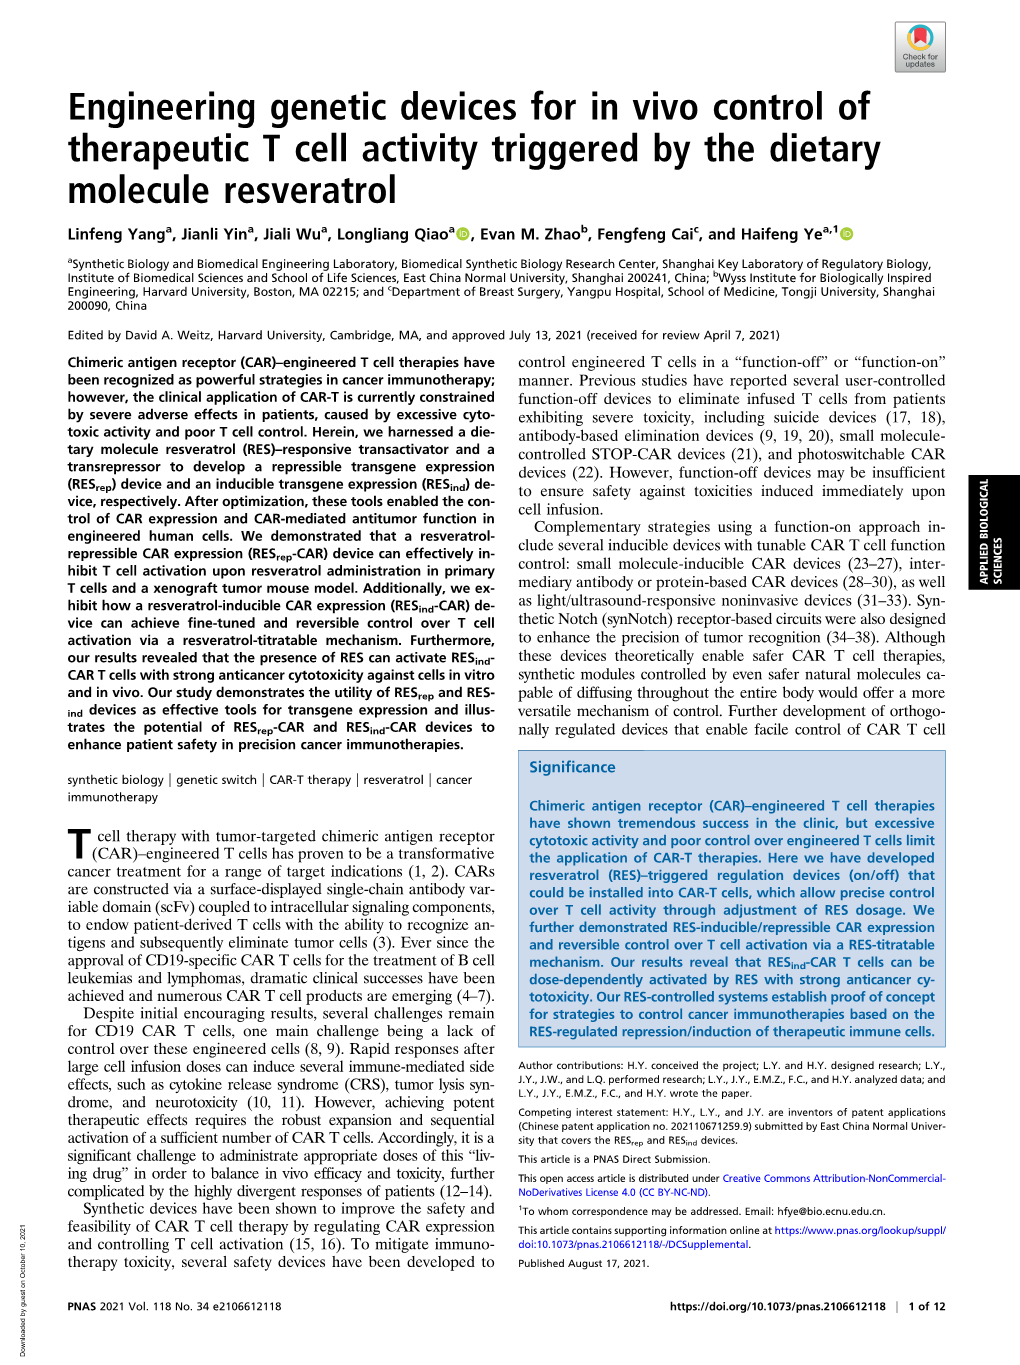 Engineering Genetic Devices for in Vivo Control of Therapeutic T Cell Activity Triggered by the Dietary Molecule Resveratrol